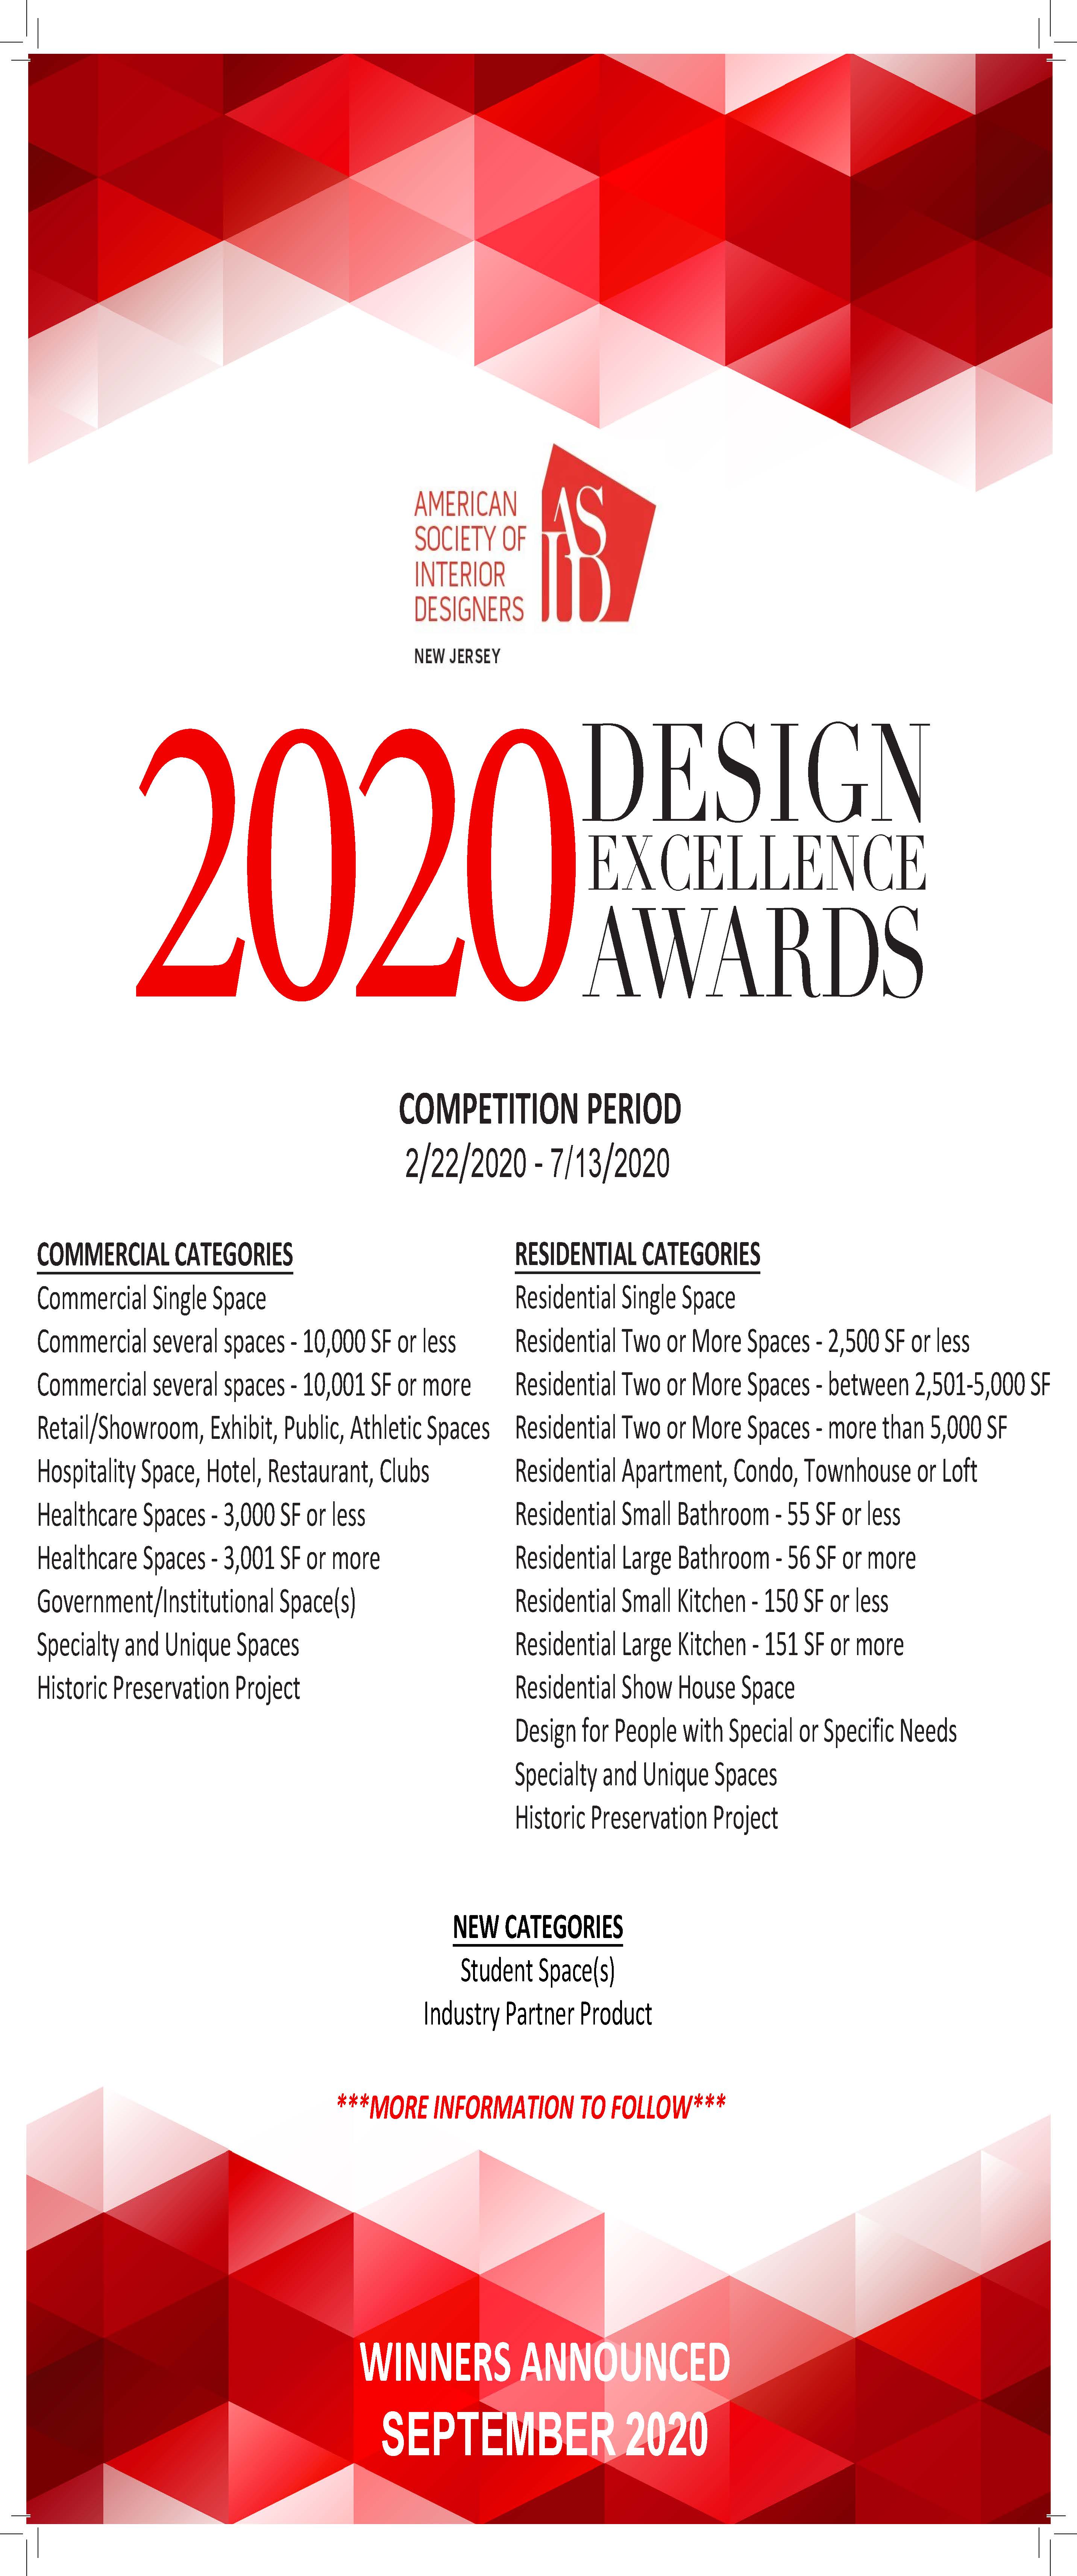 2020 Design Excellence Awards Competition